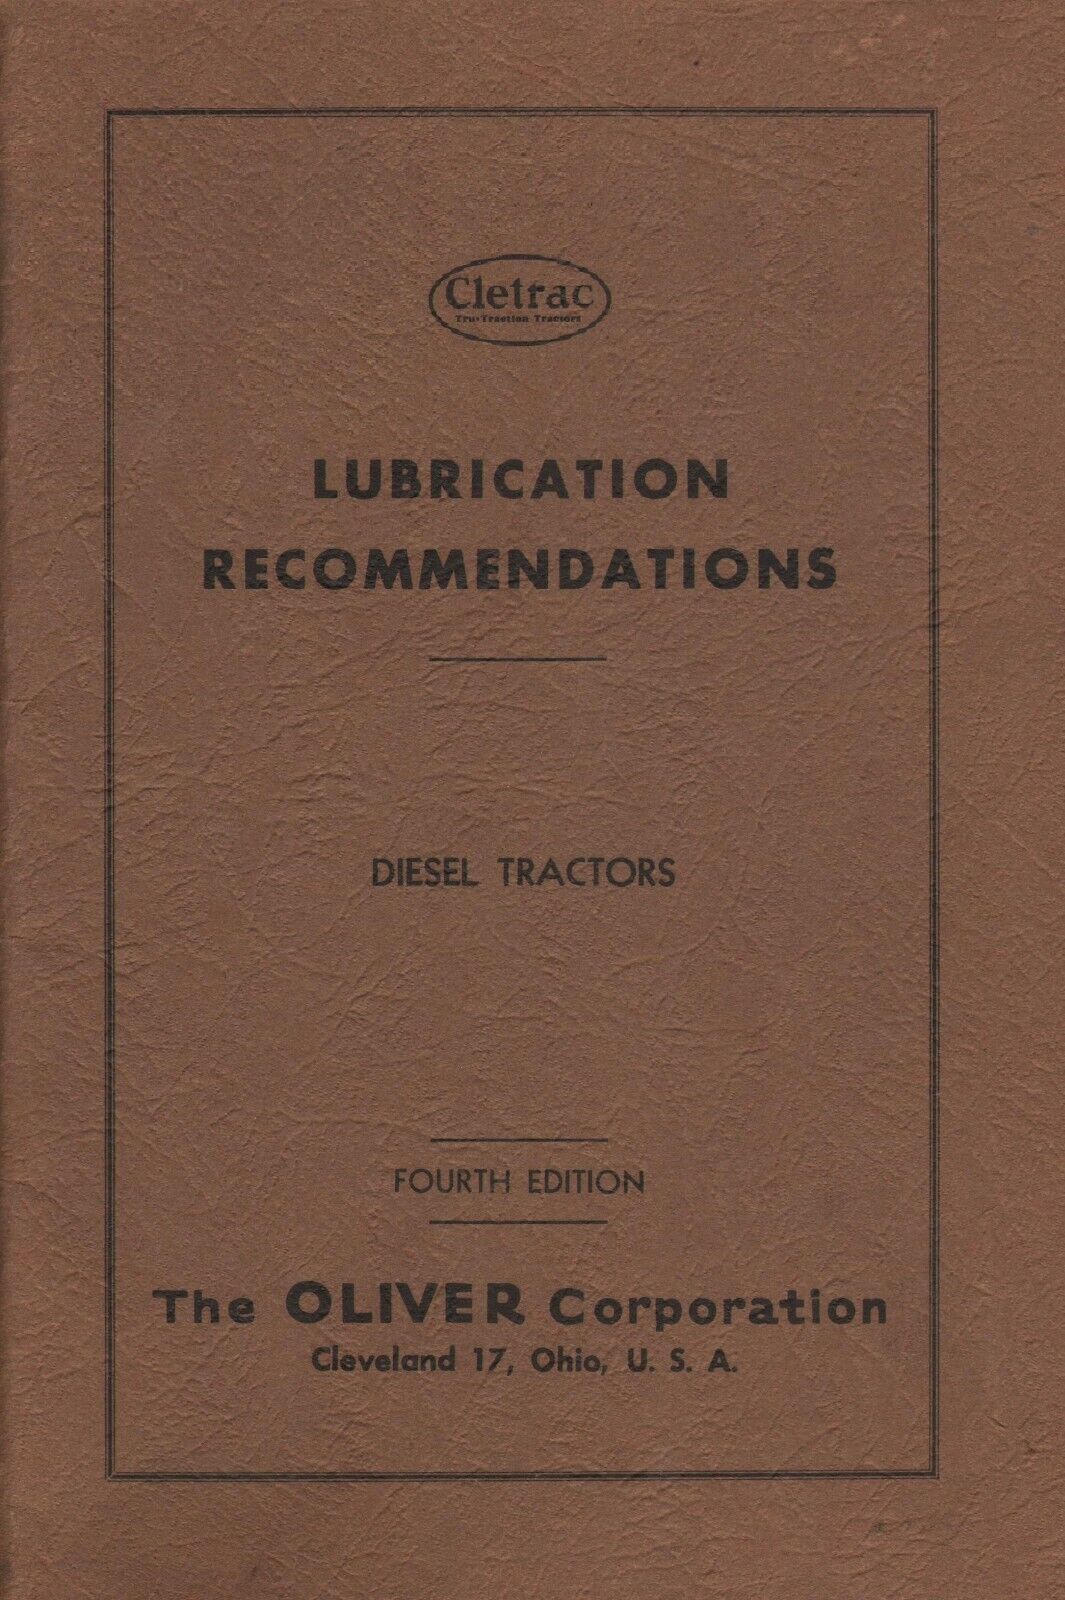 VINTAGE CLETRAC DIESEL TRACTORS LUBRICATION RECOMMENDATIONS BOOK 1945